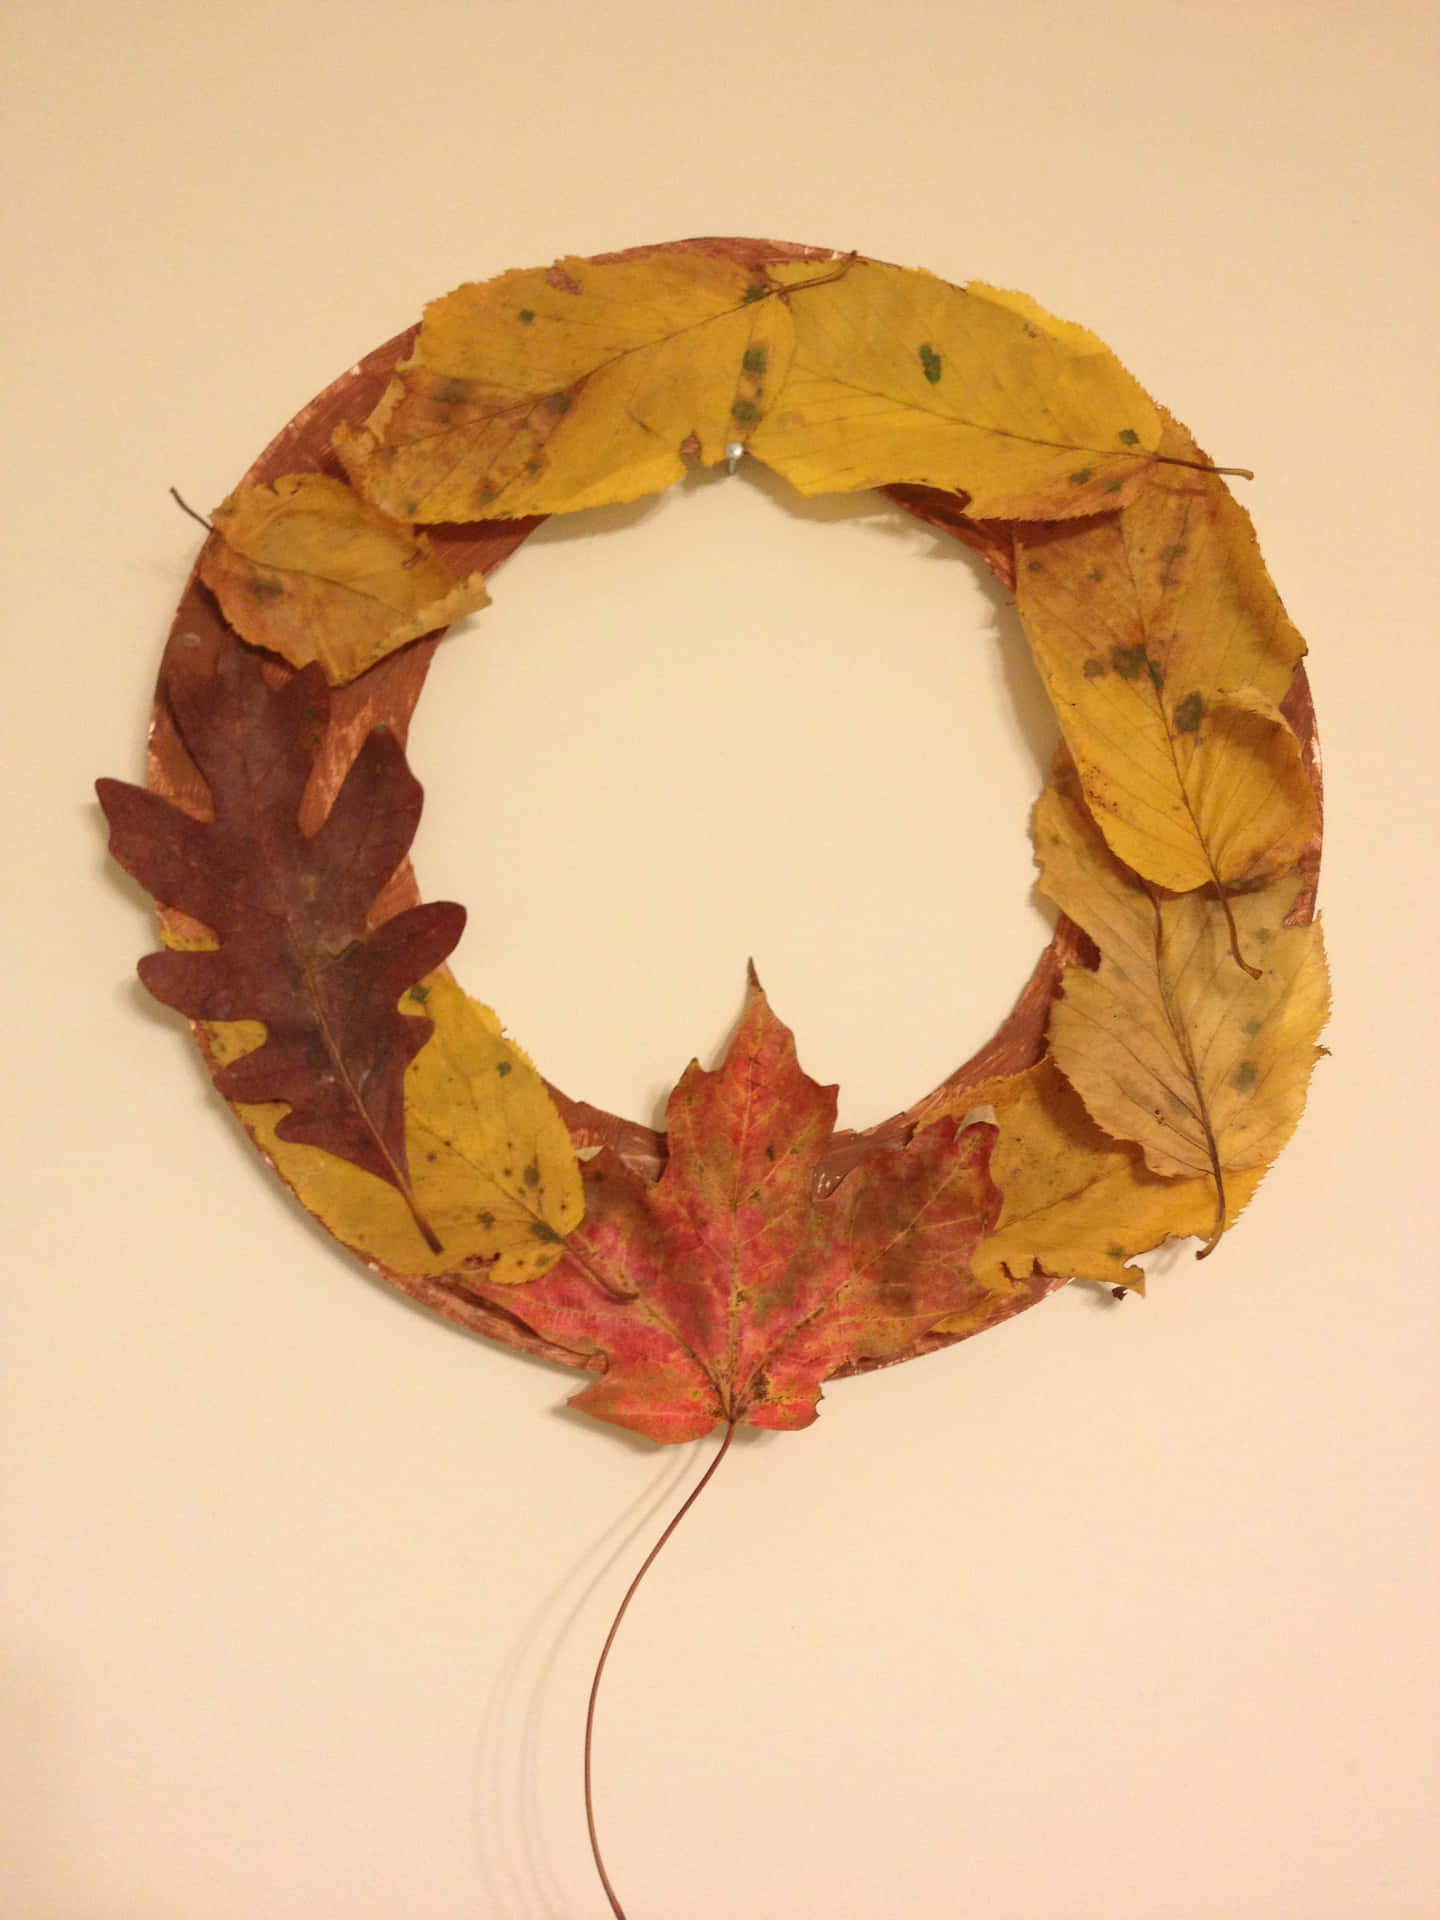 Handmade colorful autumn wreath on a wooden background Wallpaper